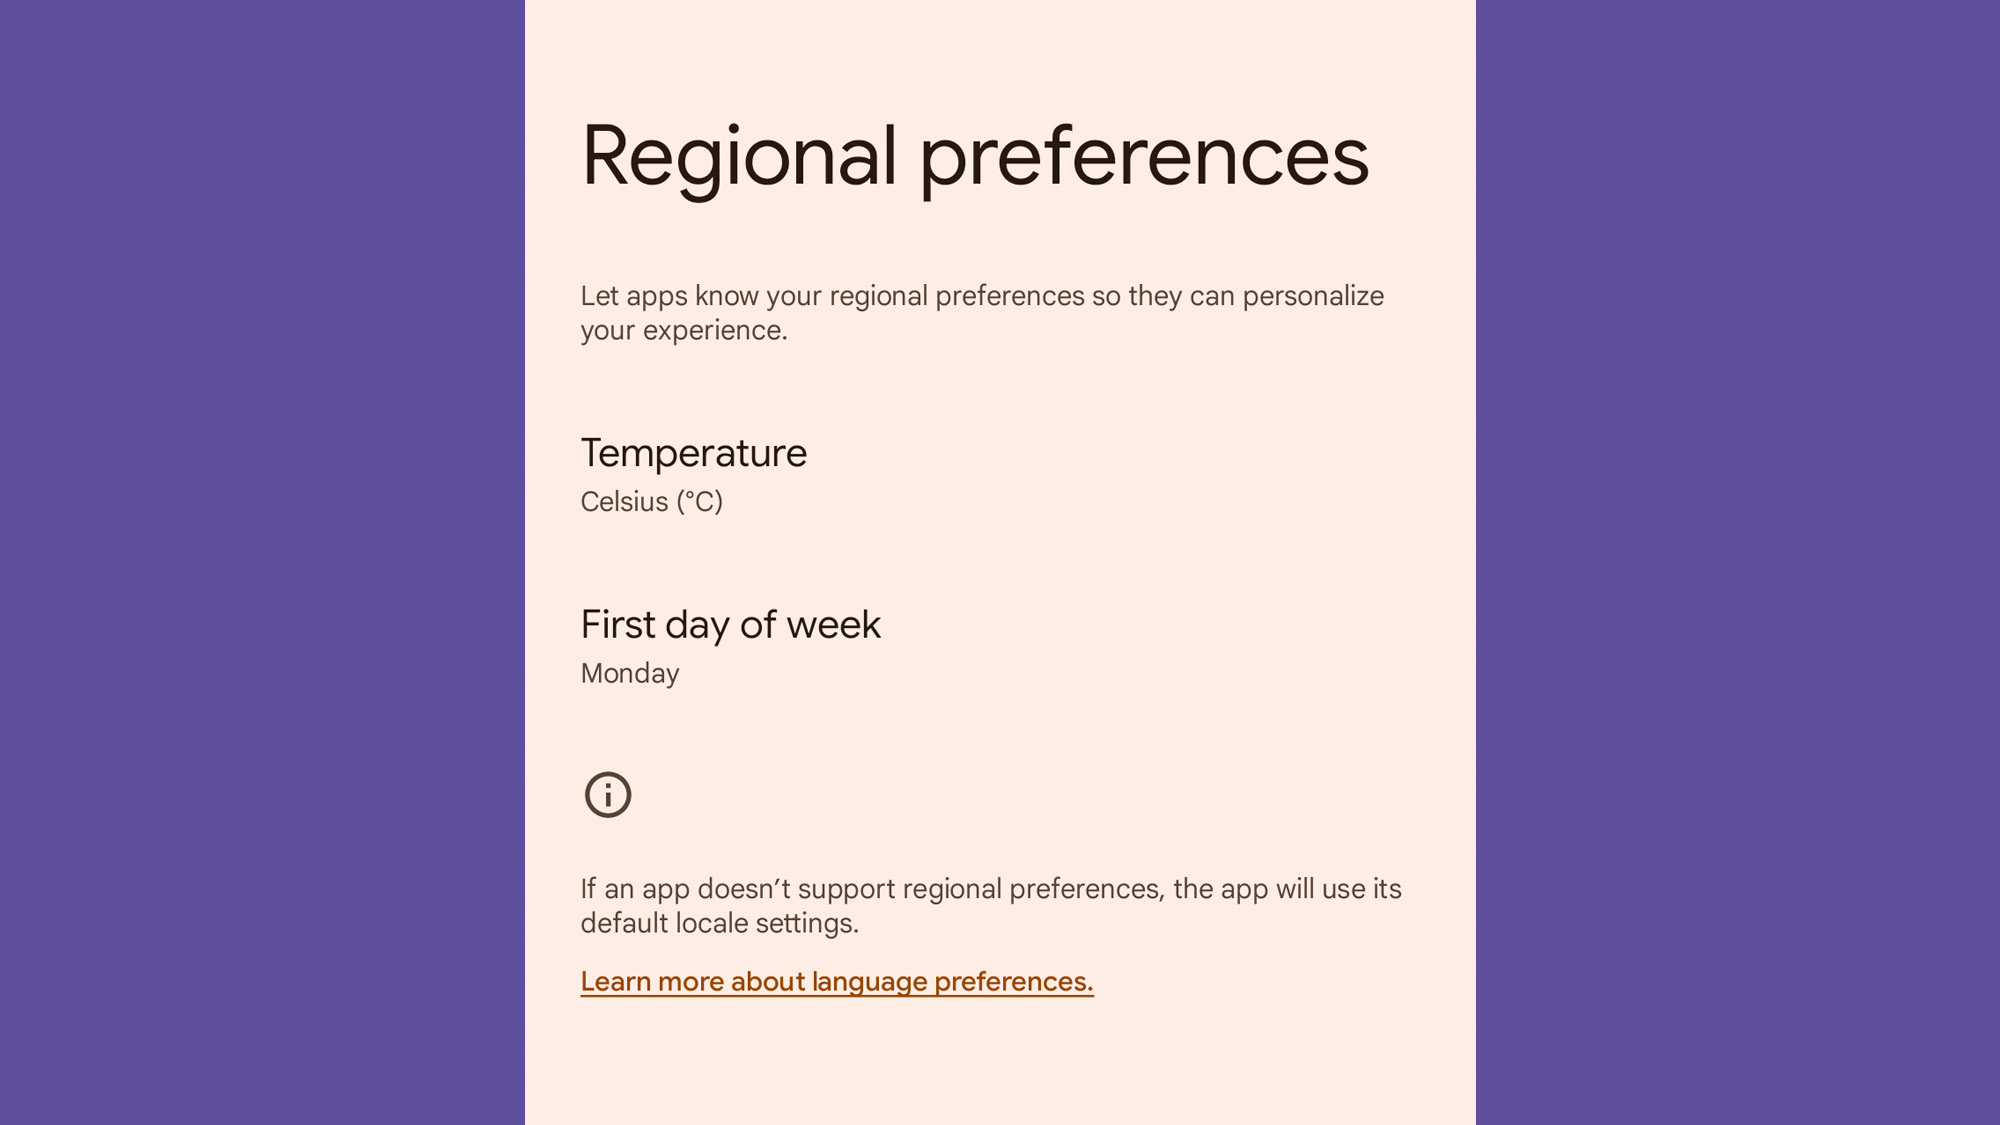 The Android settings app, showing how to set your regional preferences for temperature and other aspects of your phone interface.